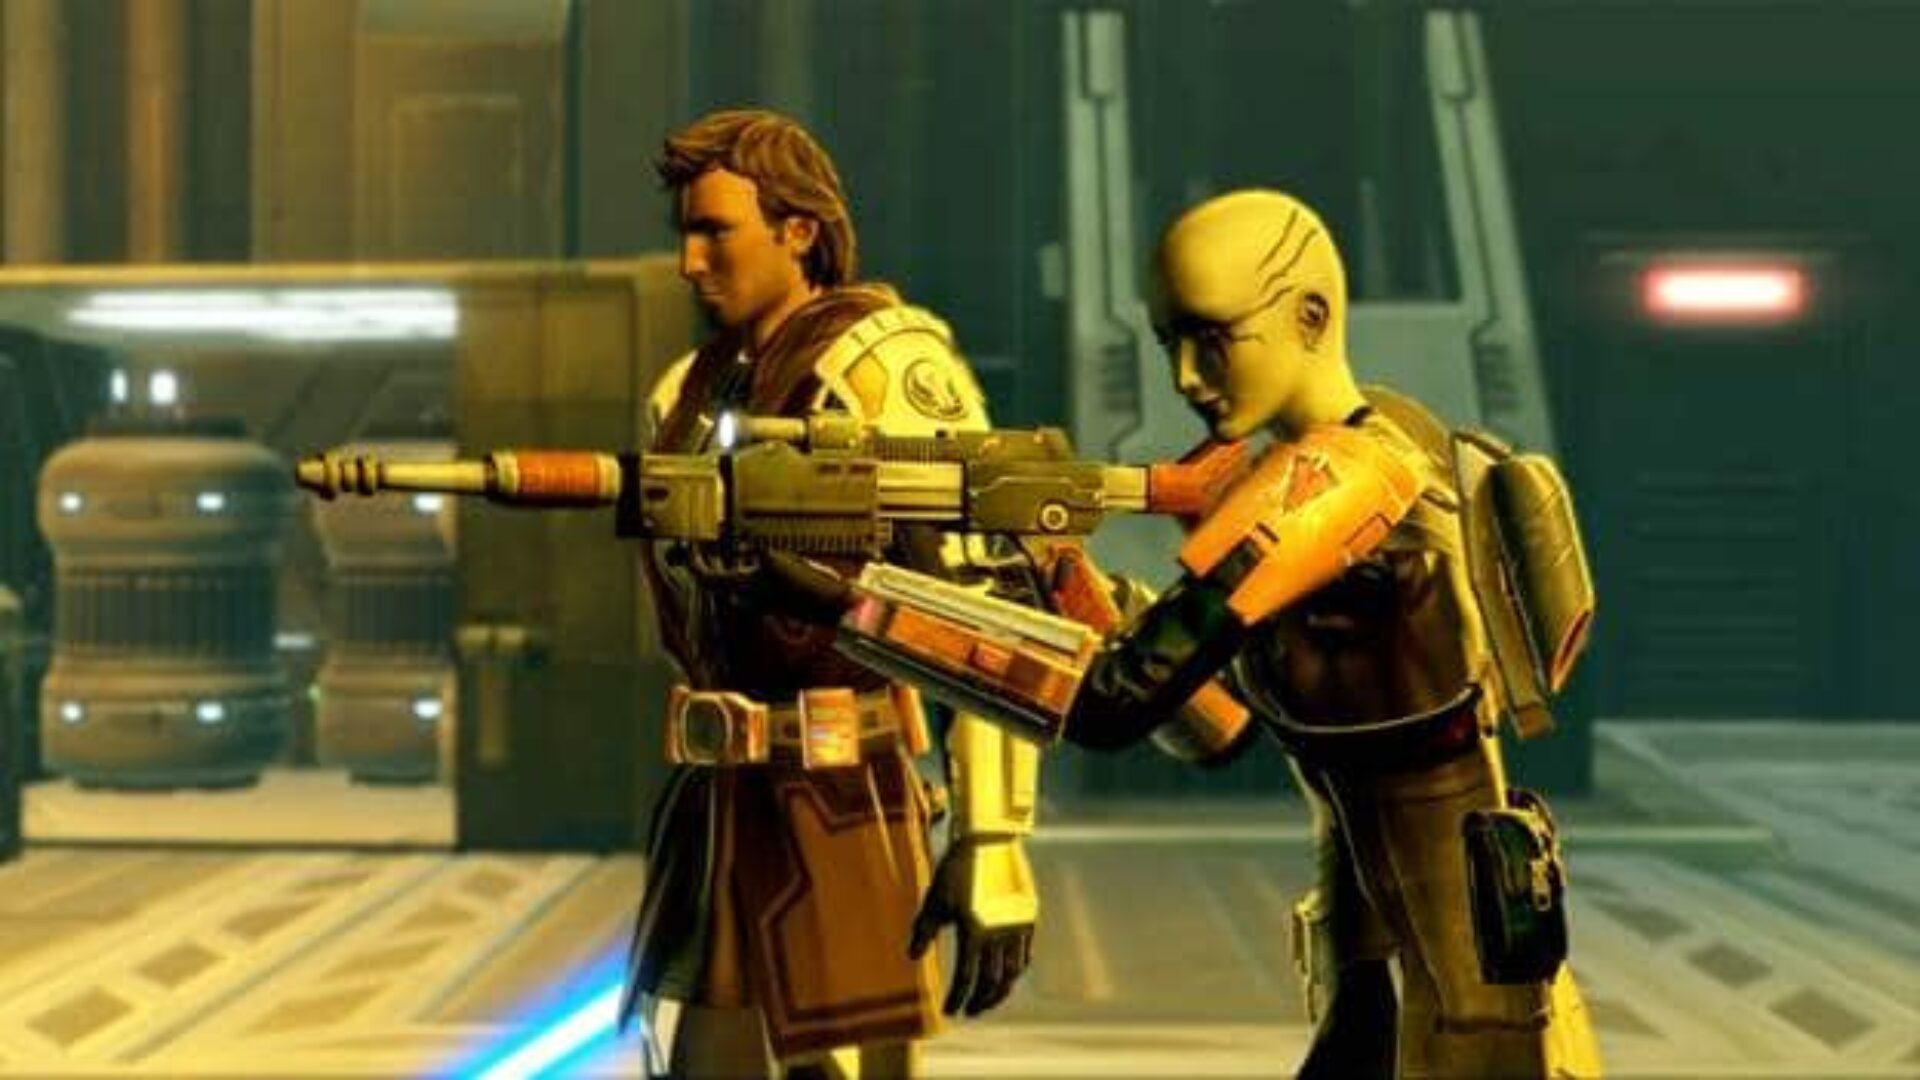 The Newest Story For Star Wars The Old Republic Is Here!